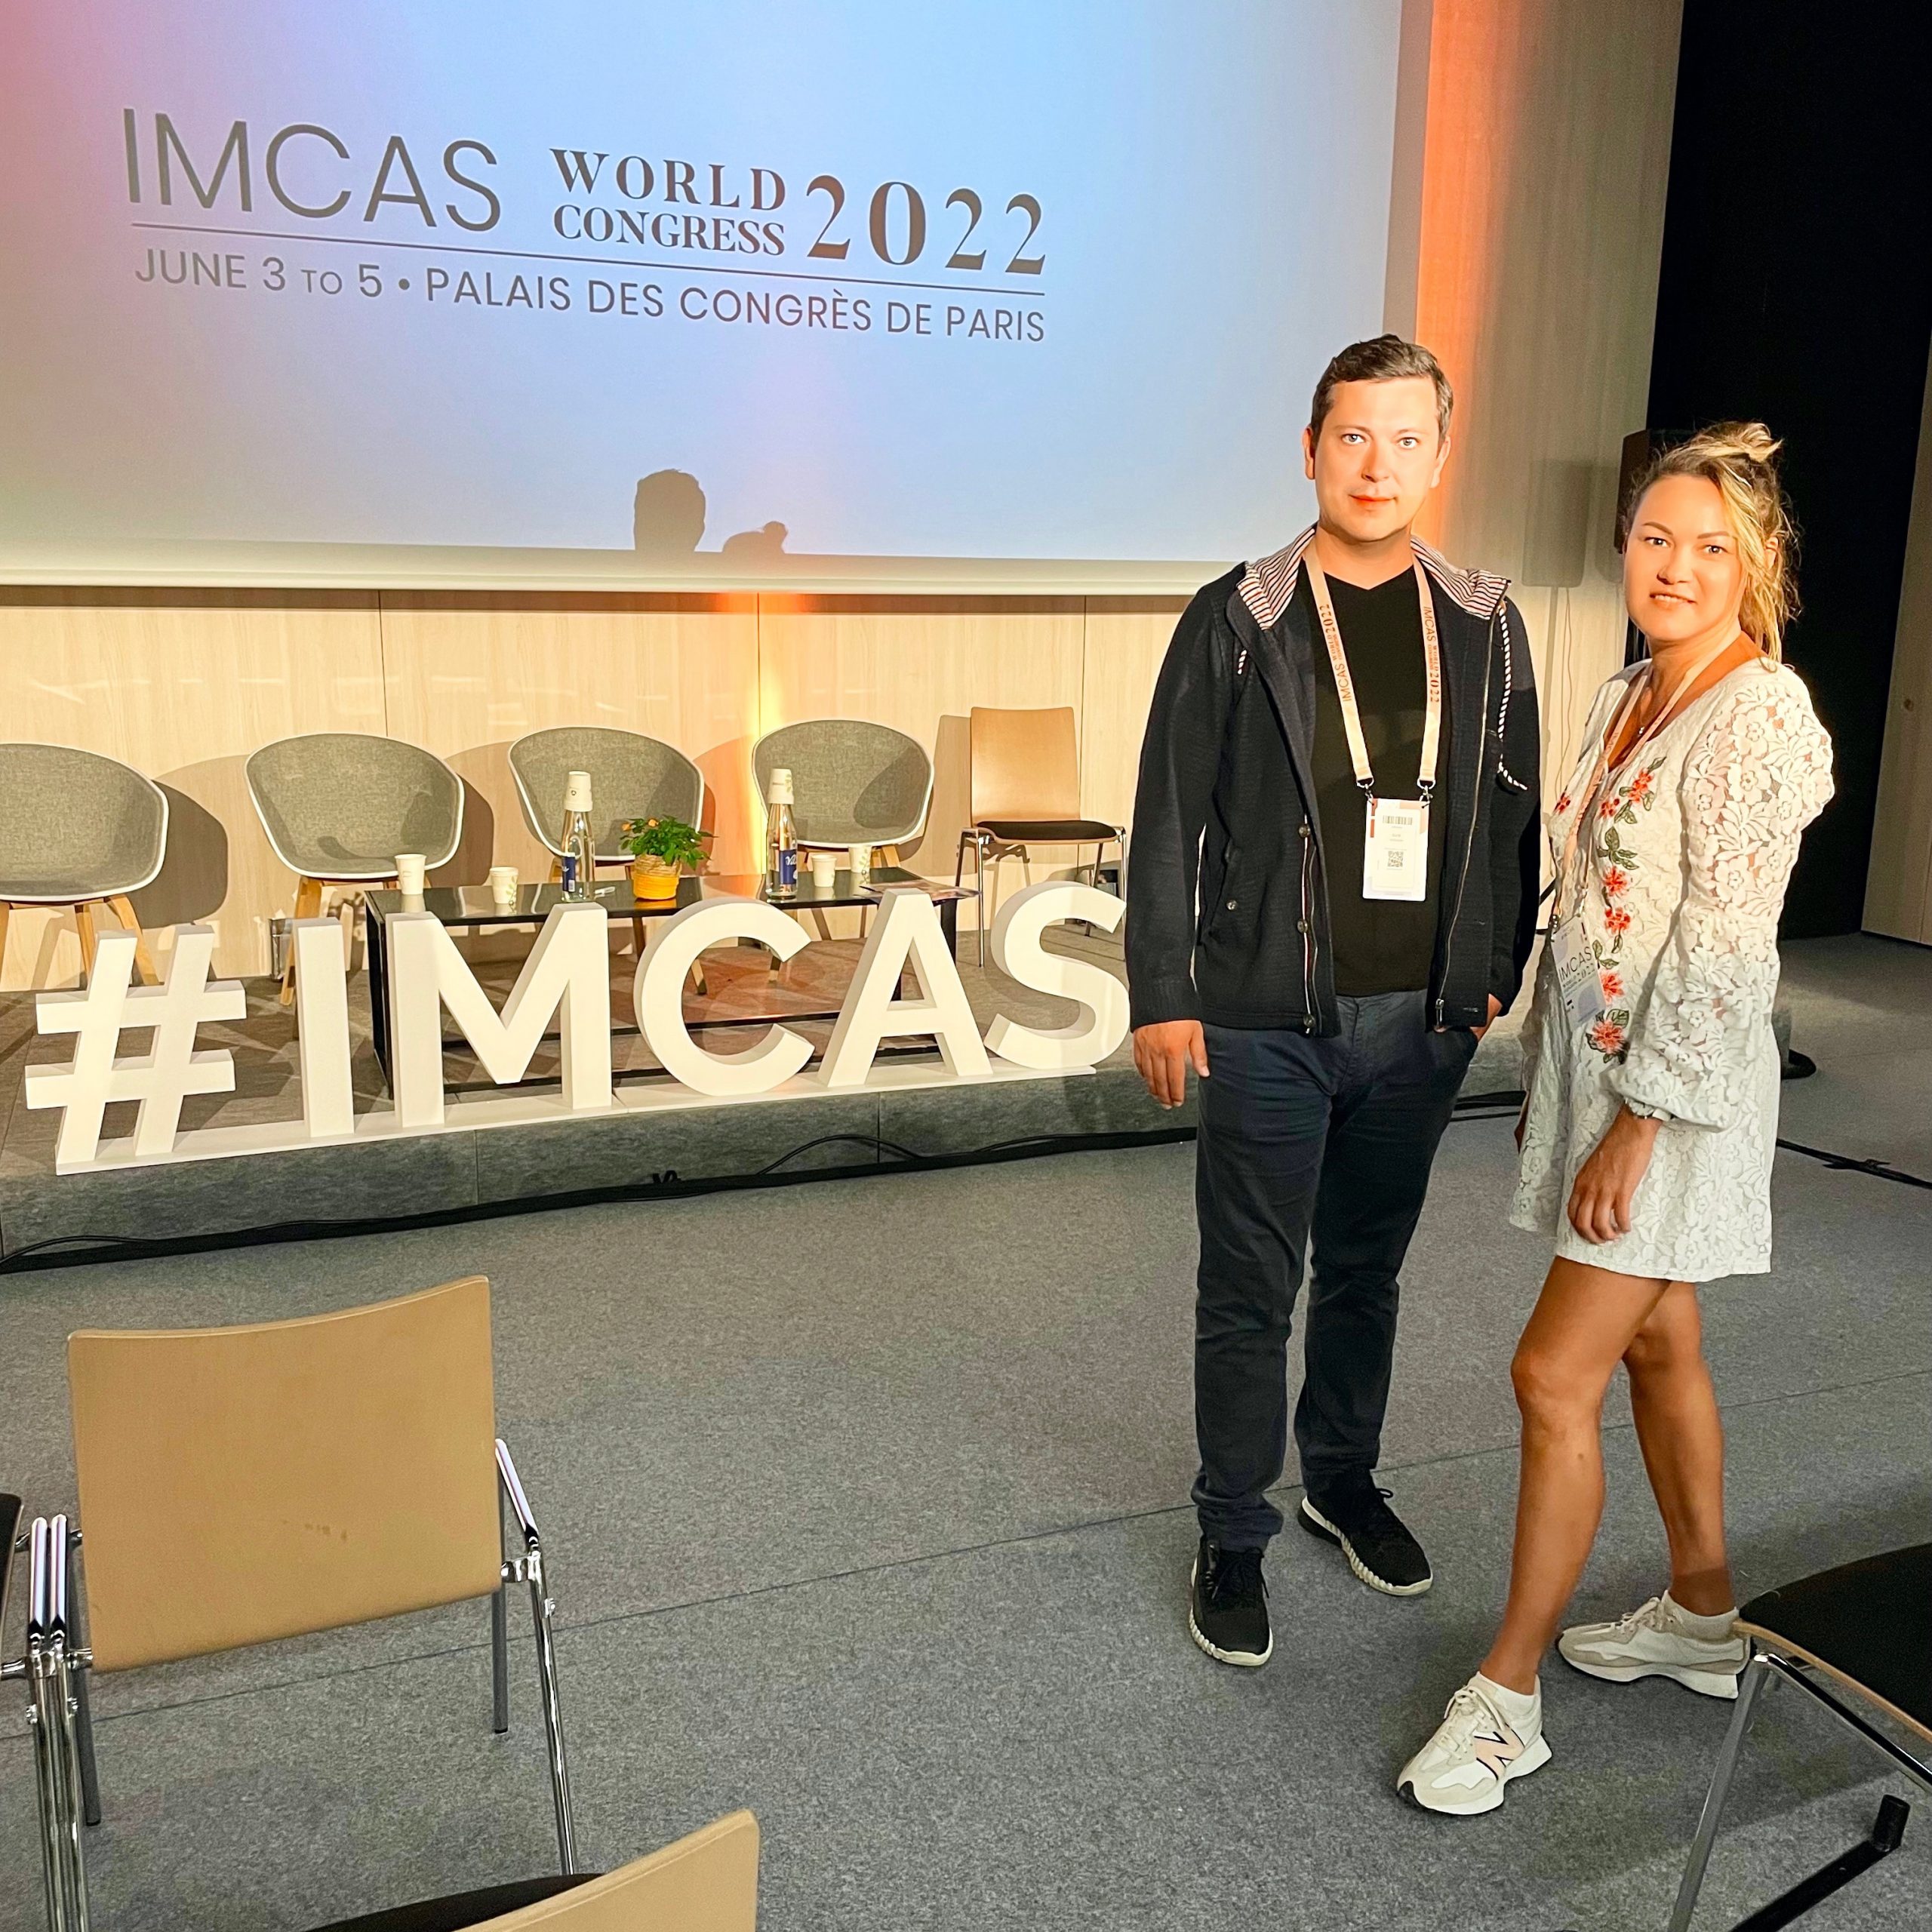 IMCAS - Congresses on Dermatology and Aesthetic & Plastic Surgery